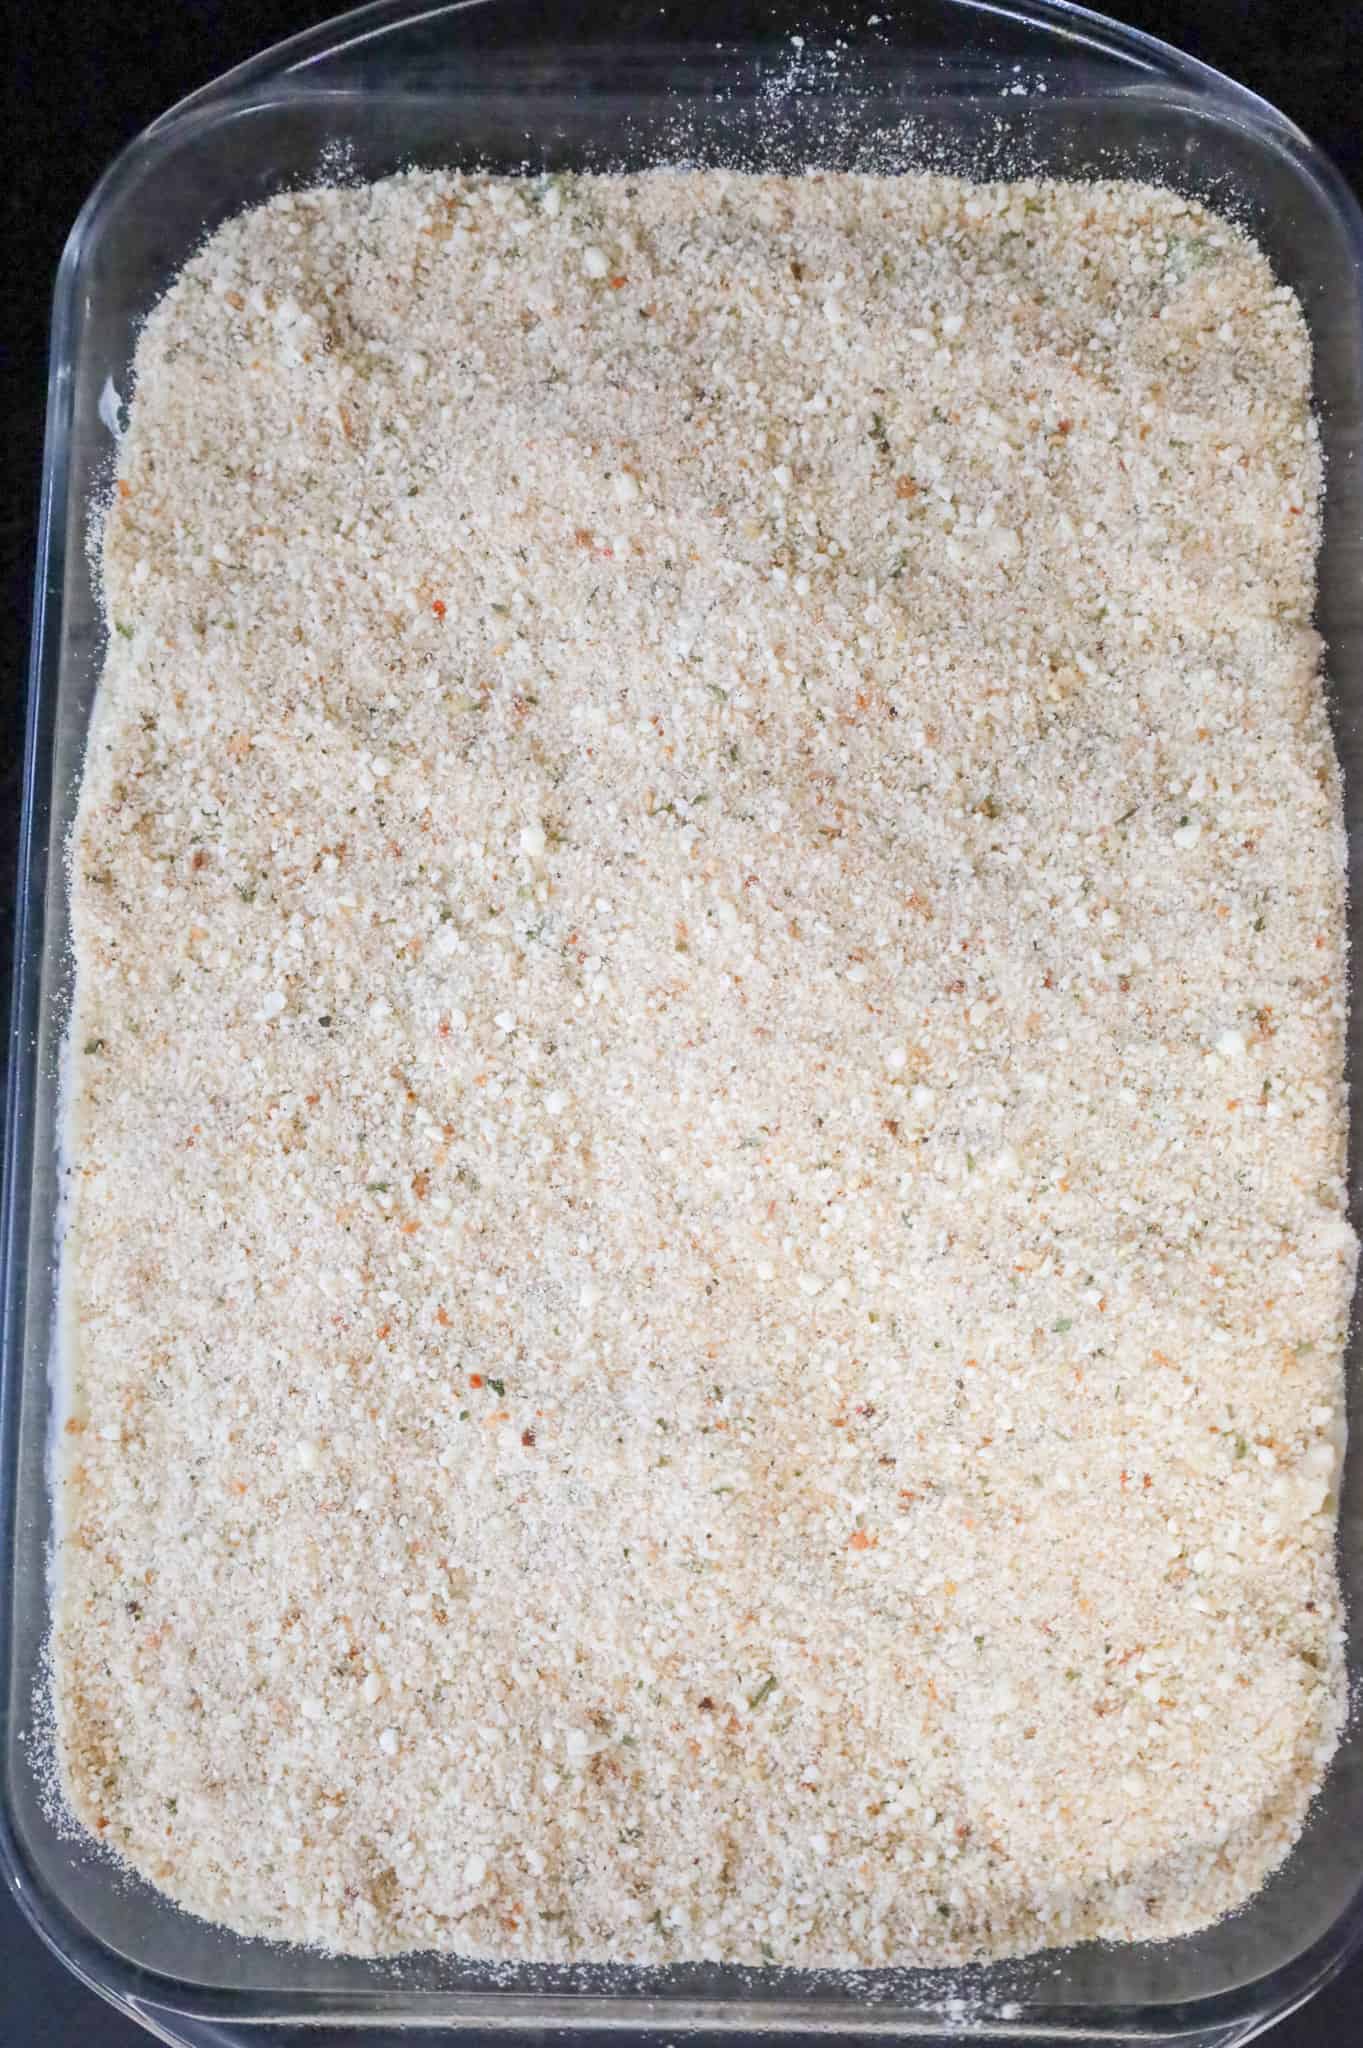 bread crumb mixture on top of chicken casserole in a baking dish